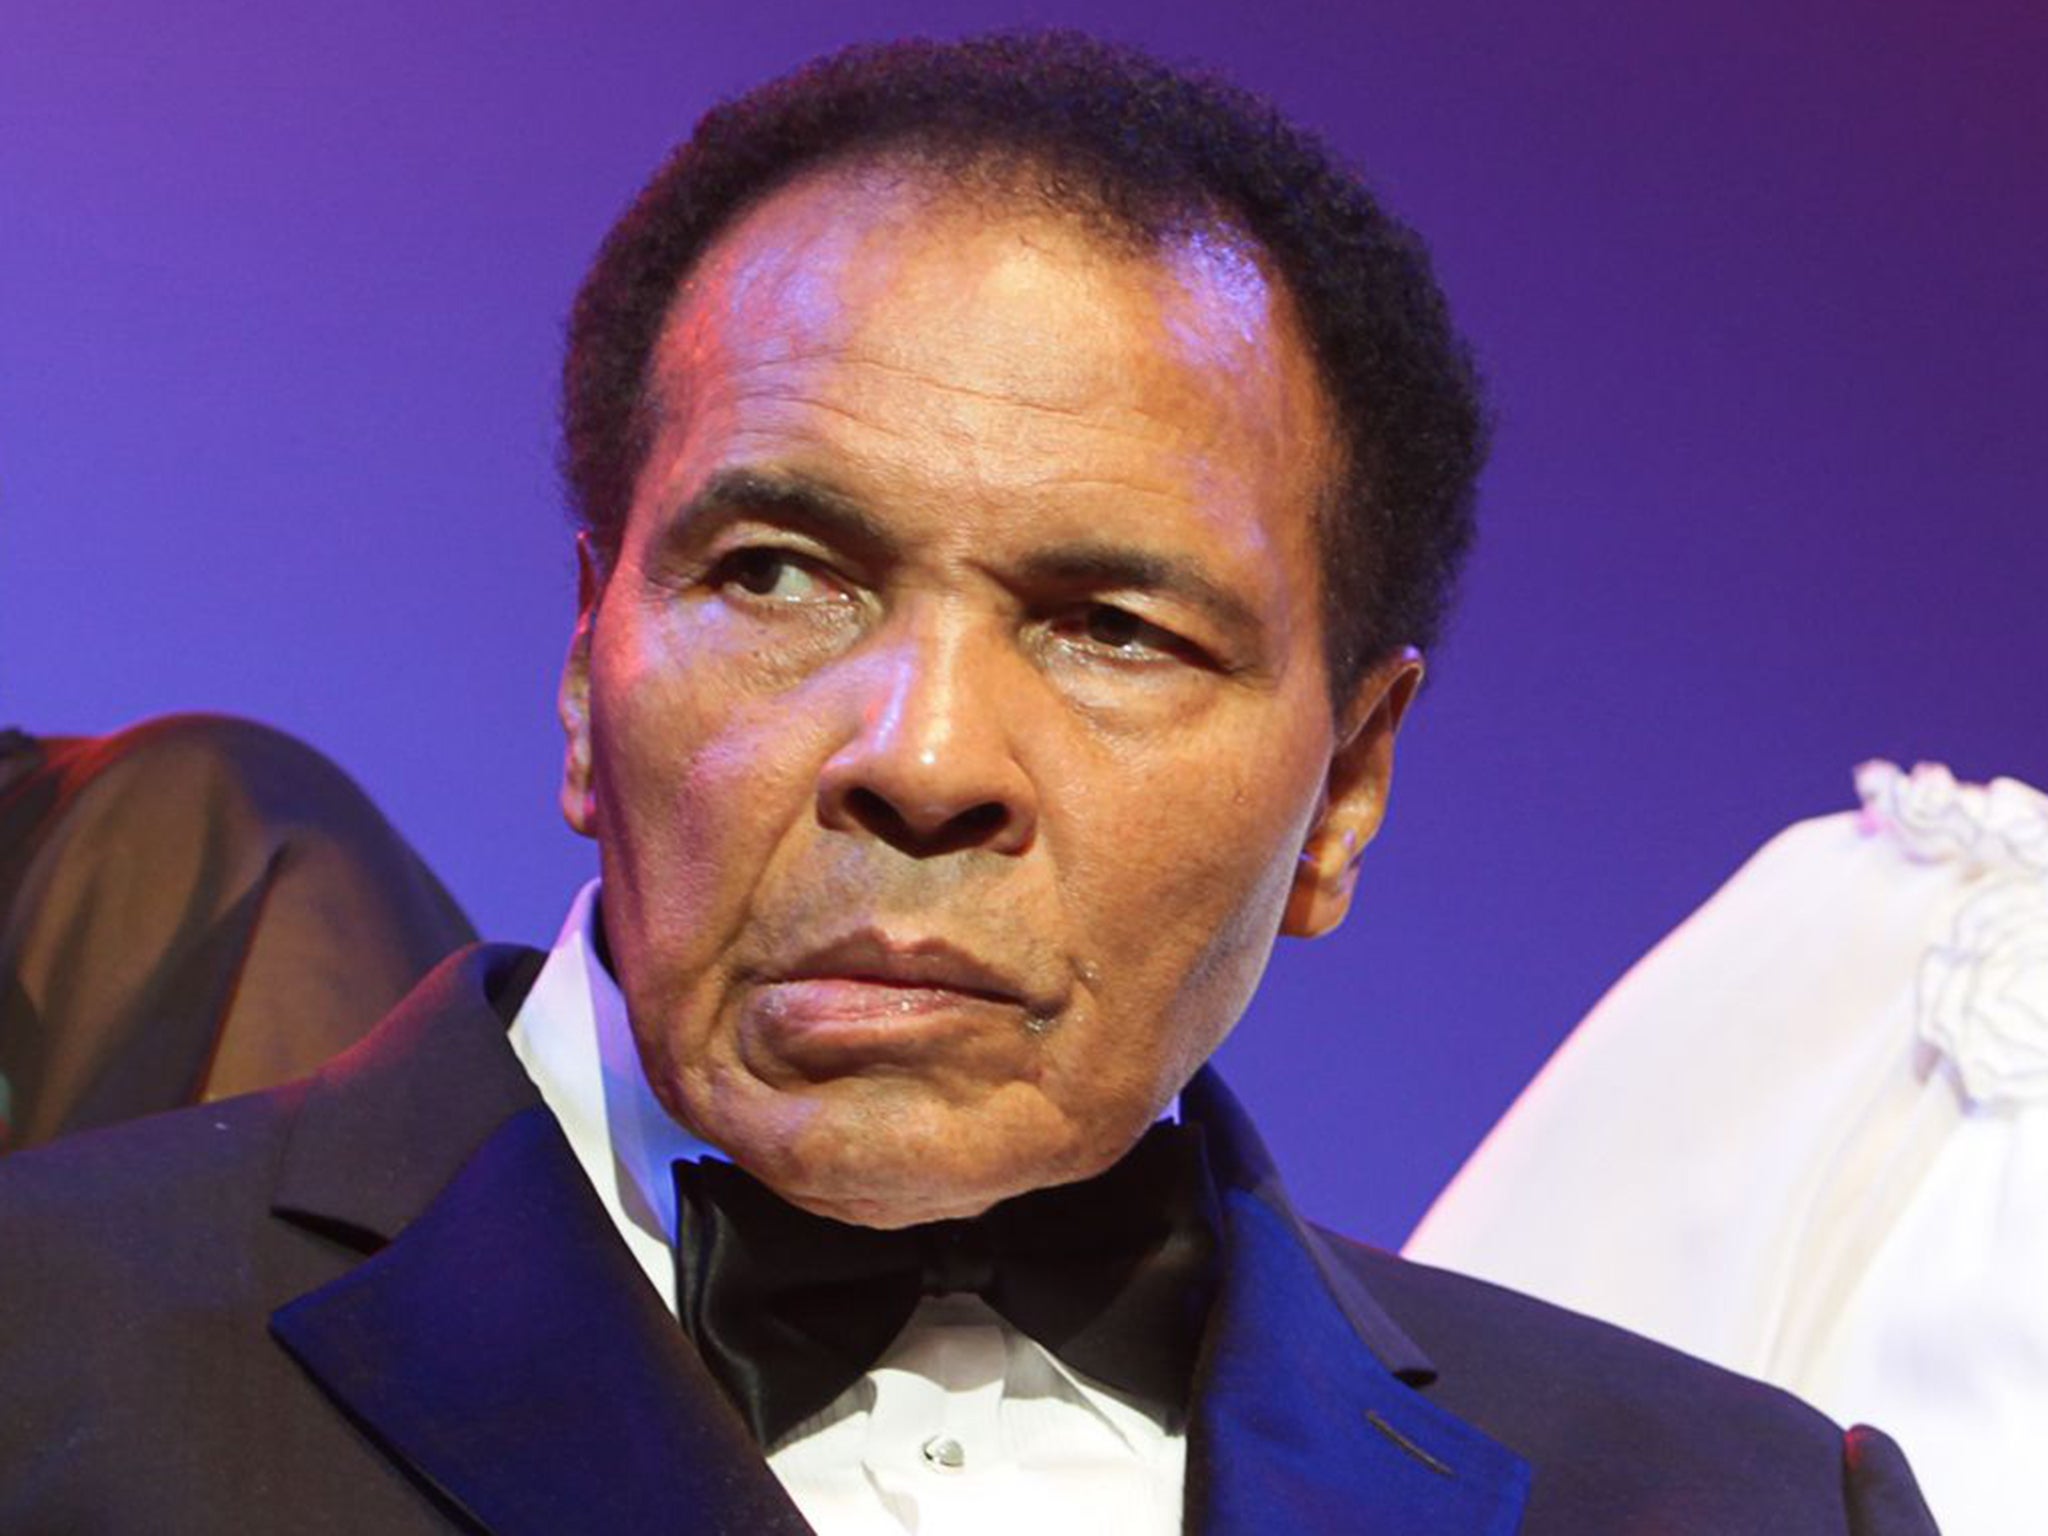 Muhammad Ali has suffered from Parkinson's disease for more than 30 years